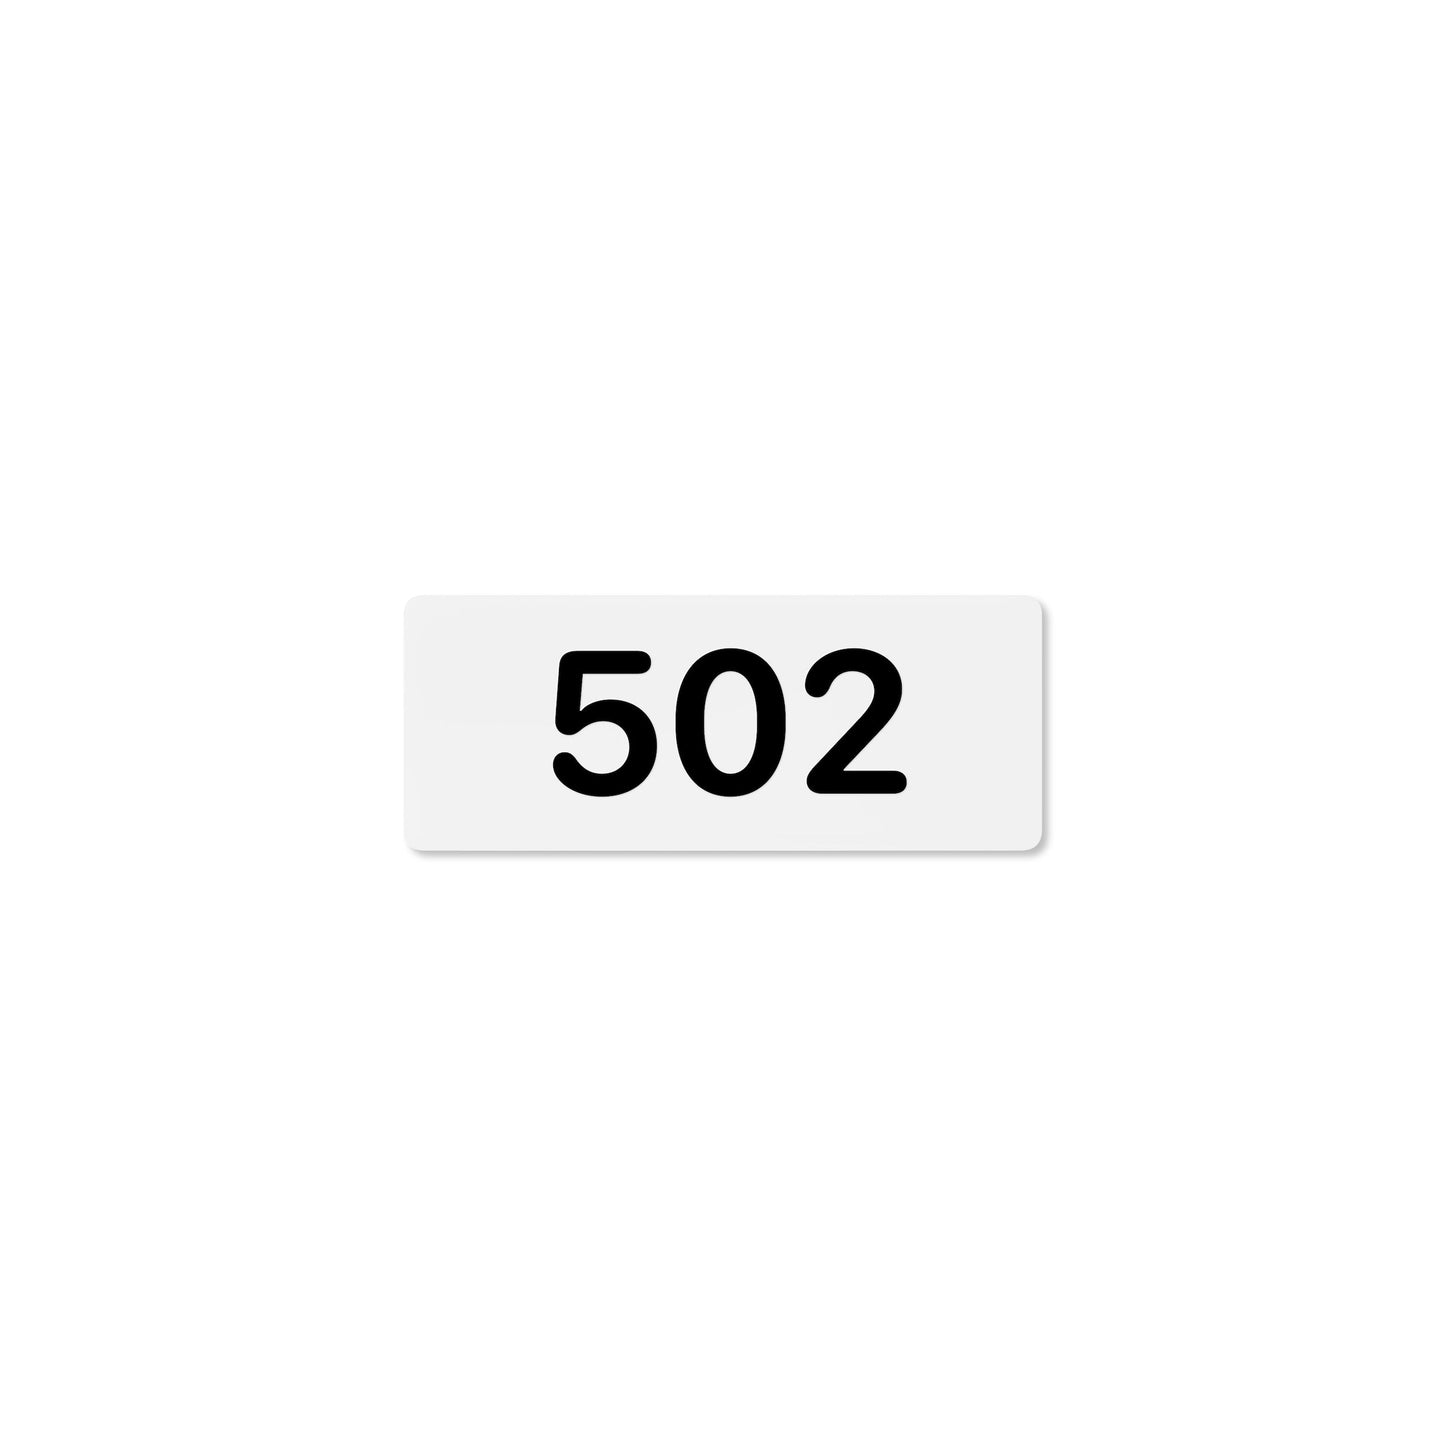 Numeral 502